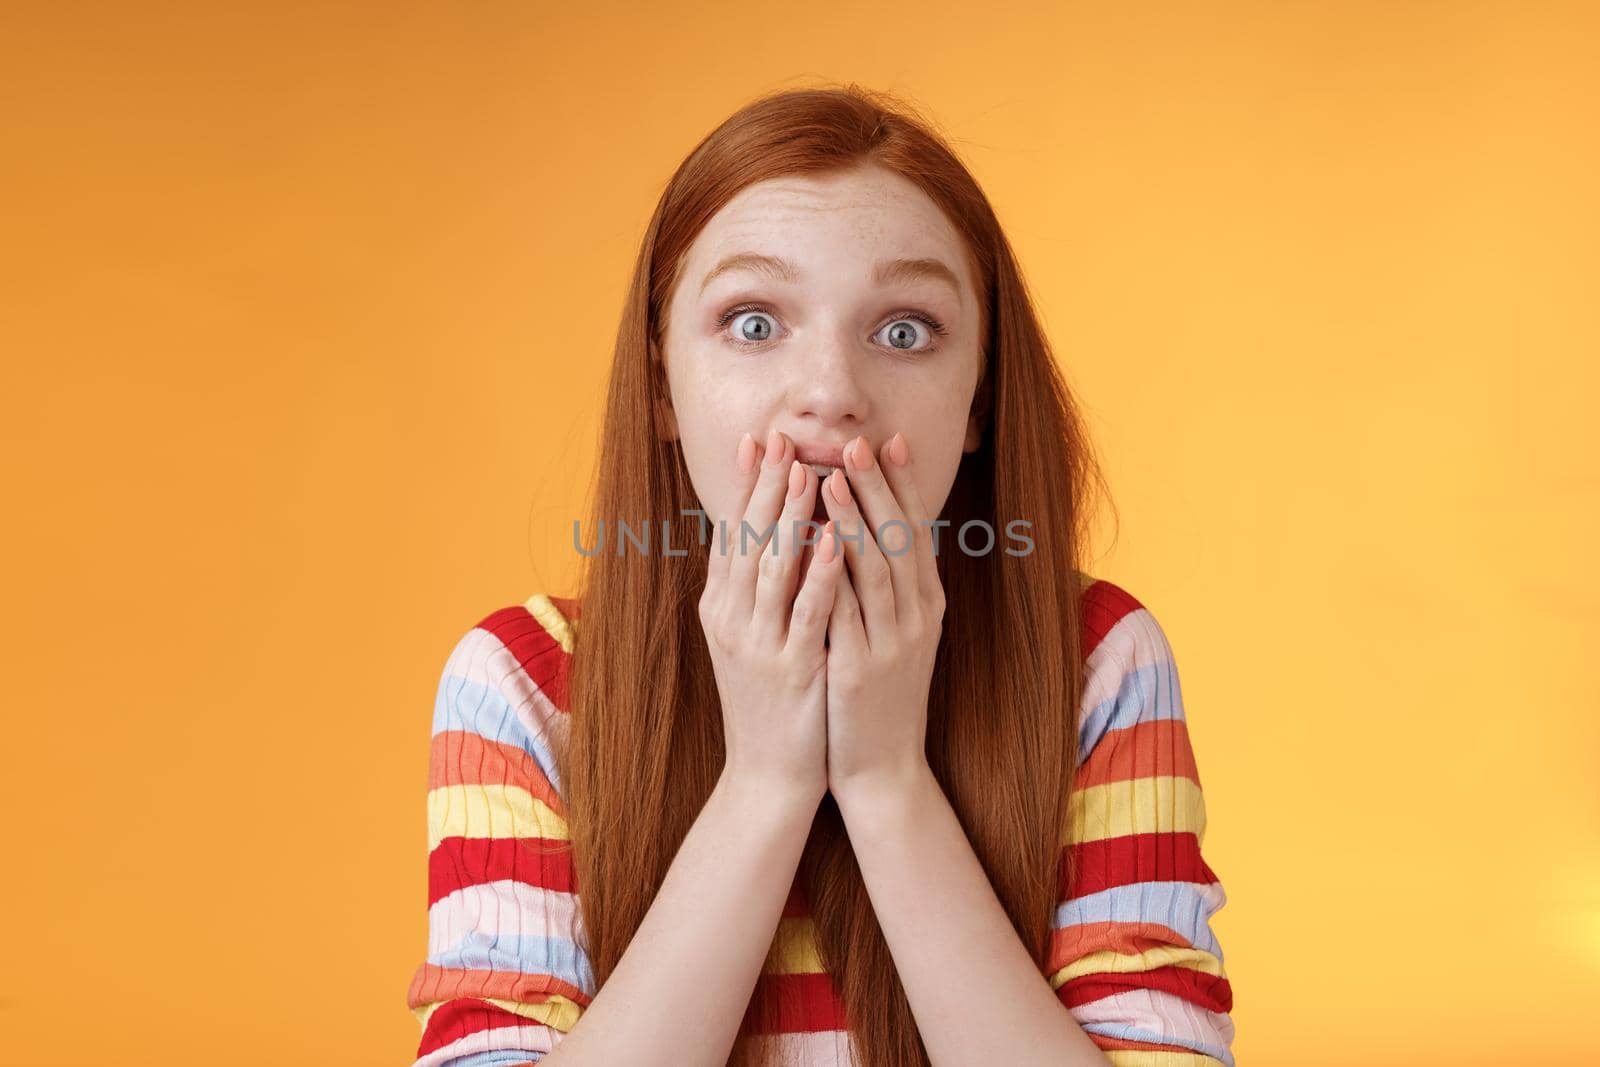 Excited shocked redhead speechless girl like gossiping standing emotional astonished hear amusing story gasping full disbelief cover mouth palm amazed posing orange background impressed.